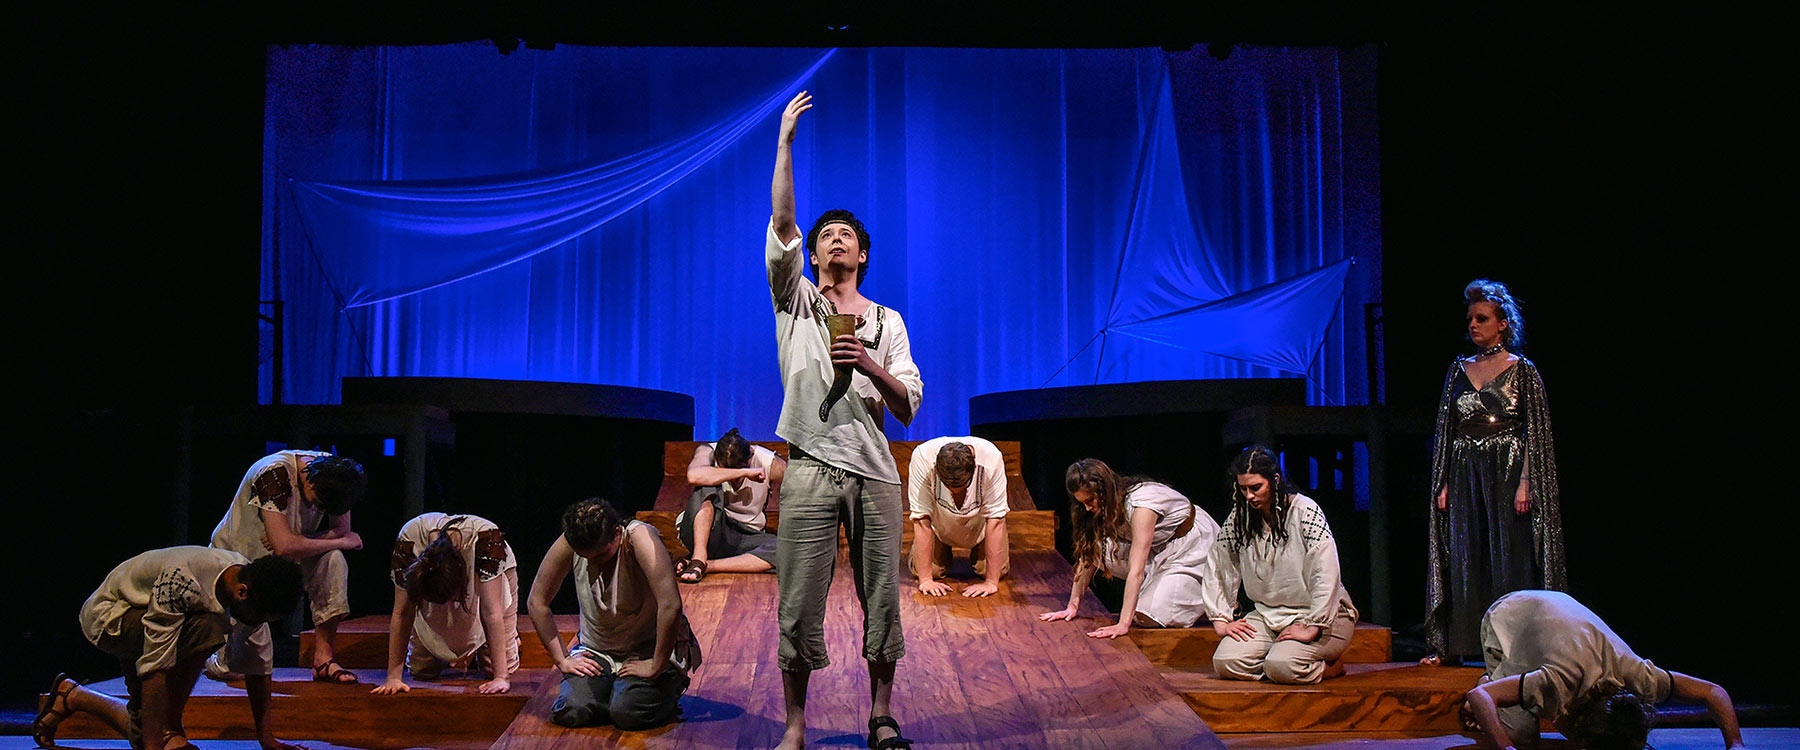 Actors perform a theatrical scene on stage; one stands and reaches upward, while others kneel.